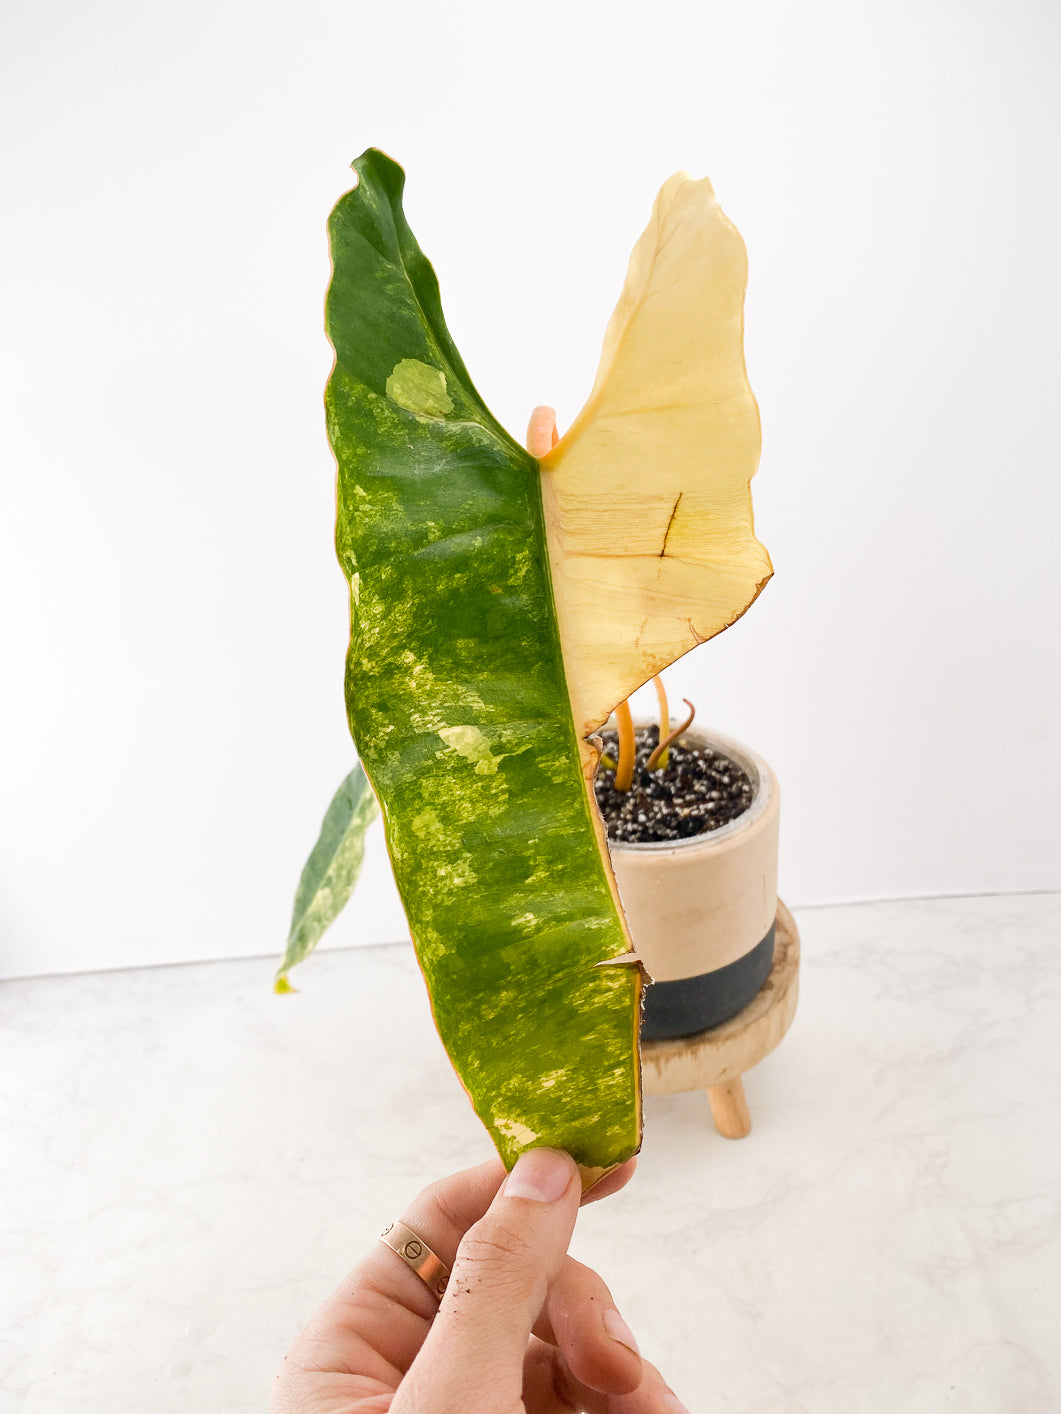 Philodendron Billietiae variegated Slightly Rooted 3 leaves 1 sprout Top Cutting